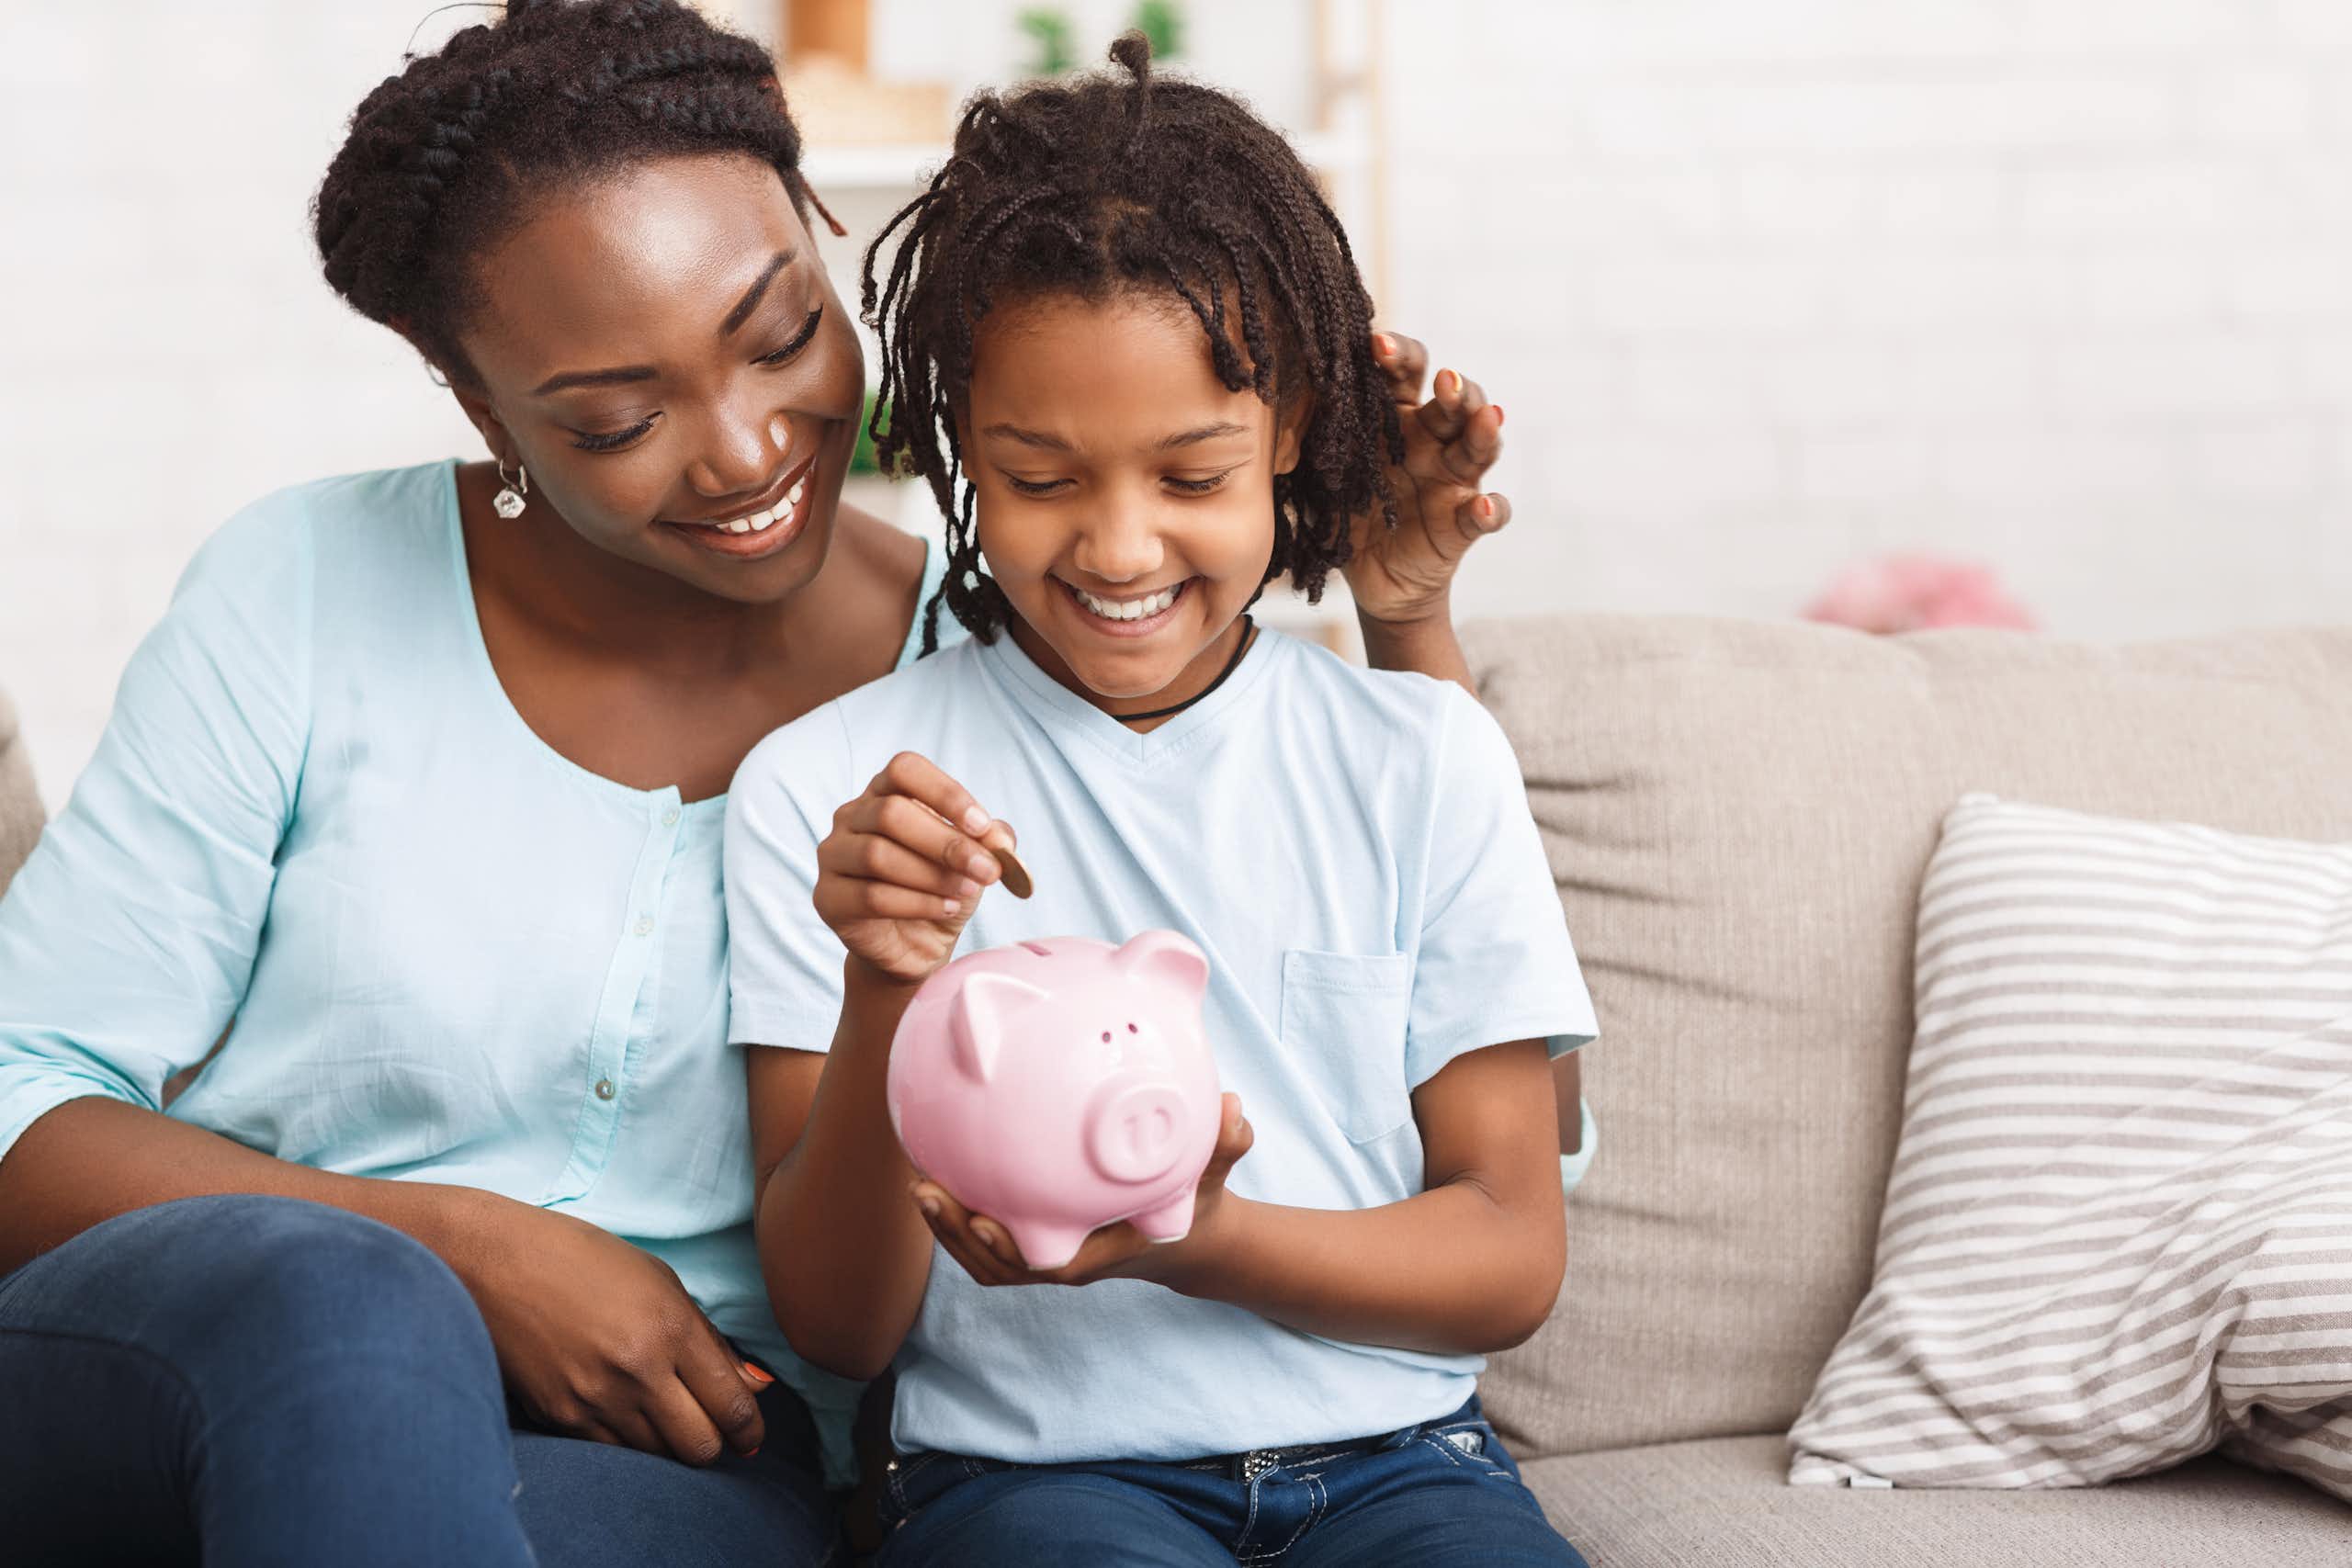 A woman in a light blue shirt and jeans smiles as her child, dressed in a similar outfit, puts money into a piggybank